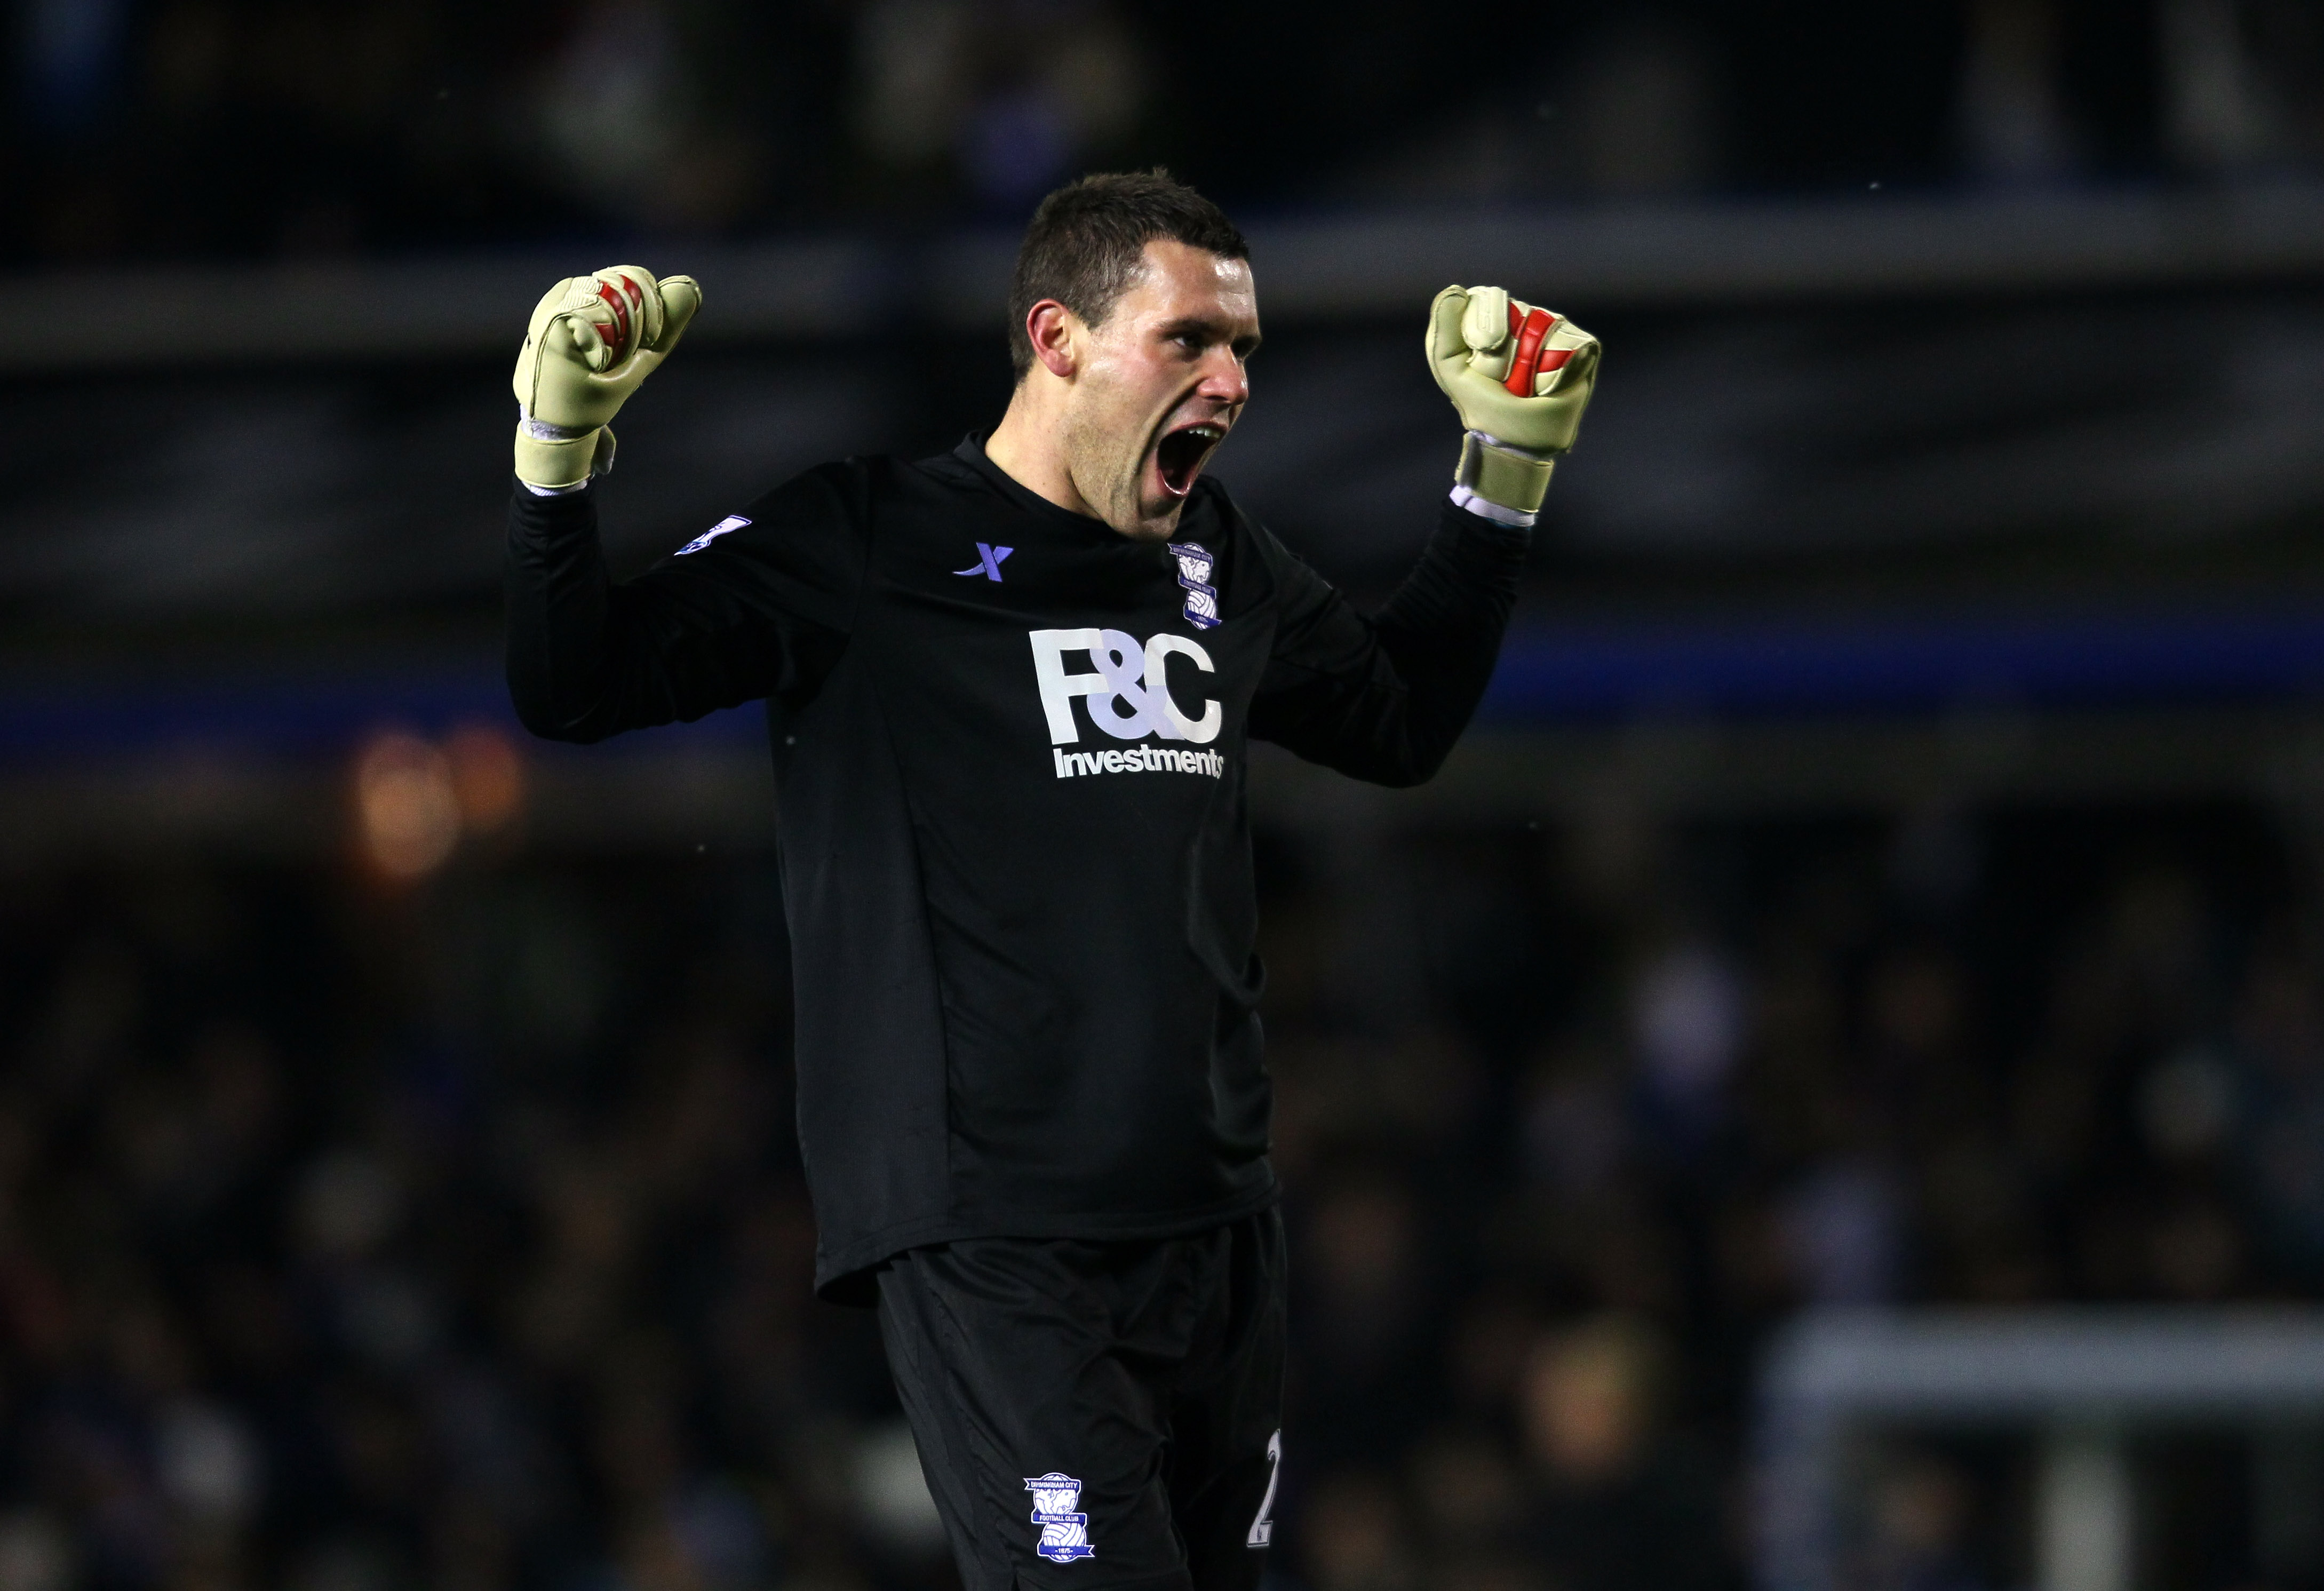 BIRMINGHAM, ENGLAND - DECEMBER 01:  Birmingham keeper Ben Foster celebrates the City goal during the Carling Cup Quarter Final between Birmingham City and Aston Villa at St Andrews on December 1, 2010 in Birmingham, England.  (Photo by Stu Forster/Getty I